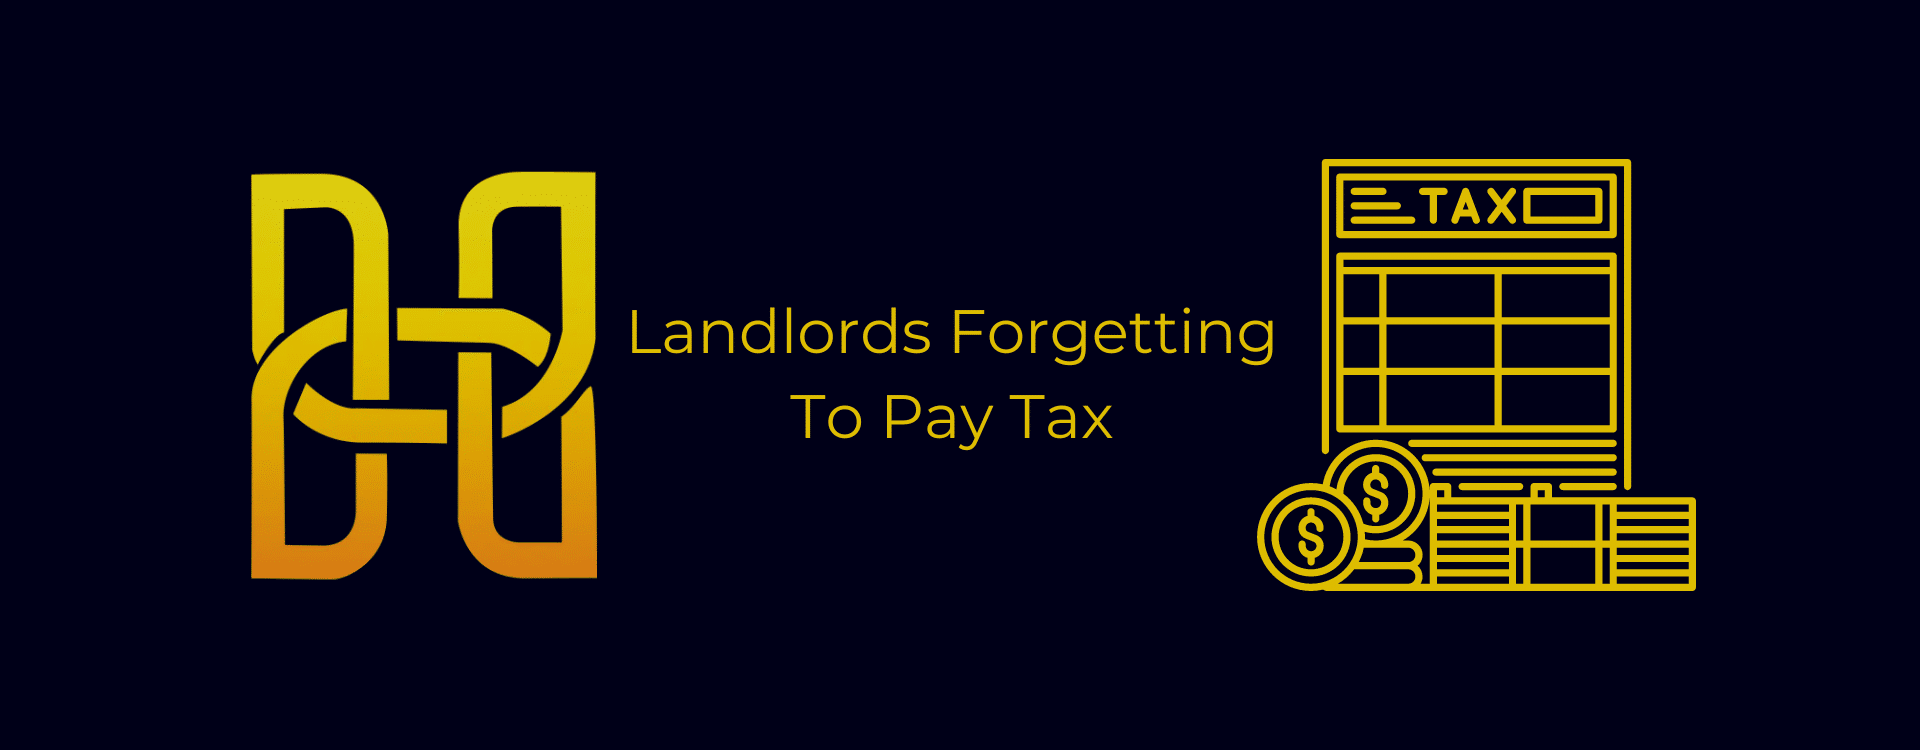 Landlords Forgetting To Pay Tax